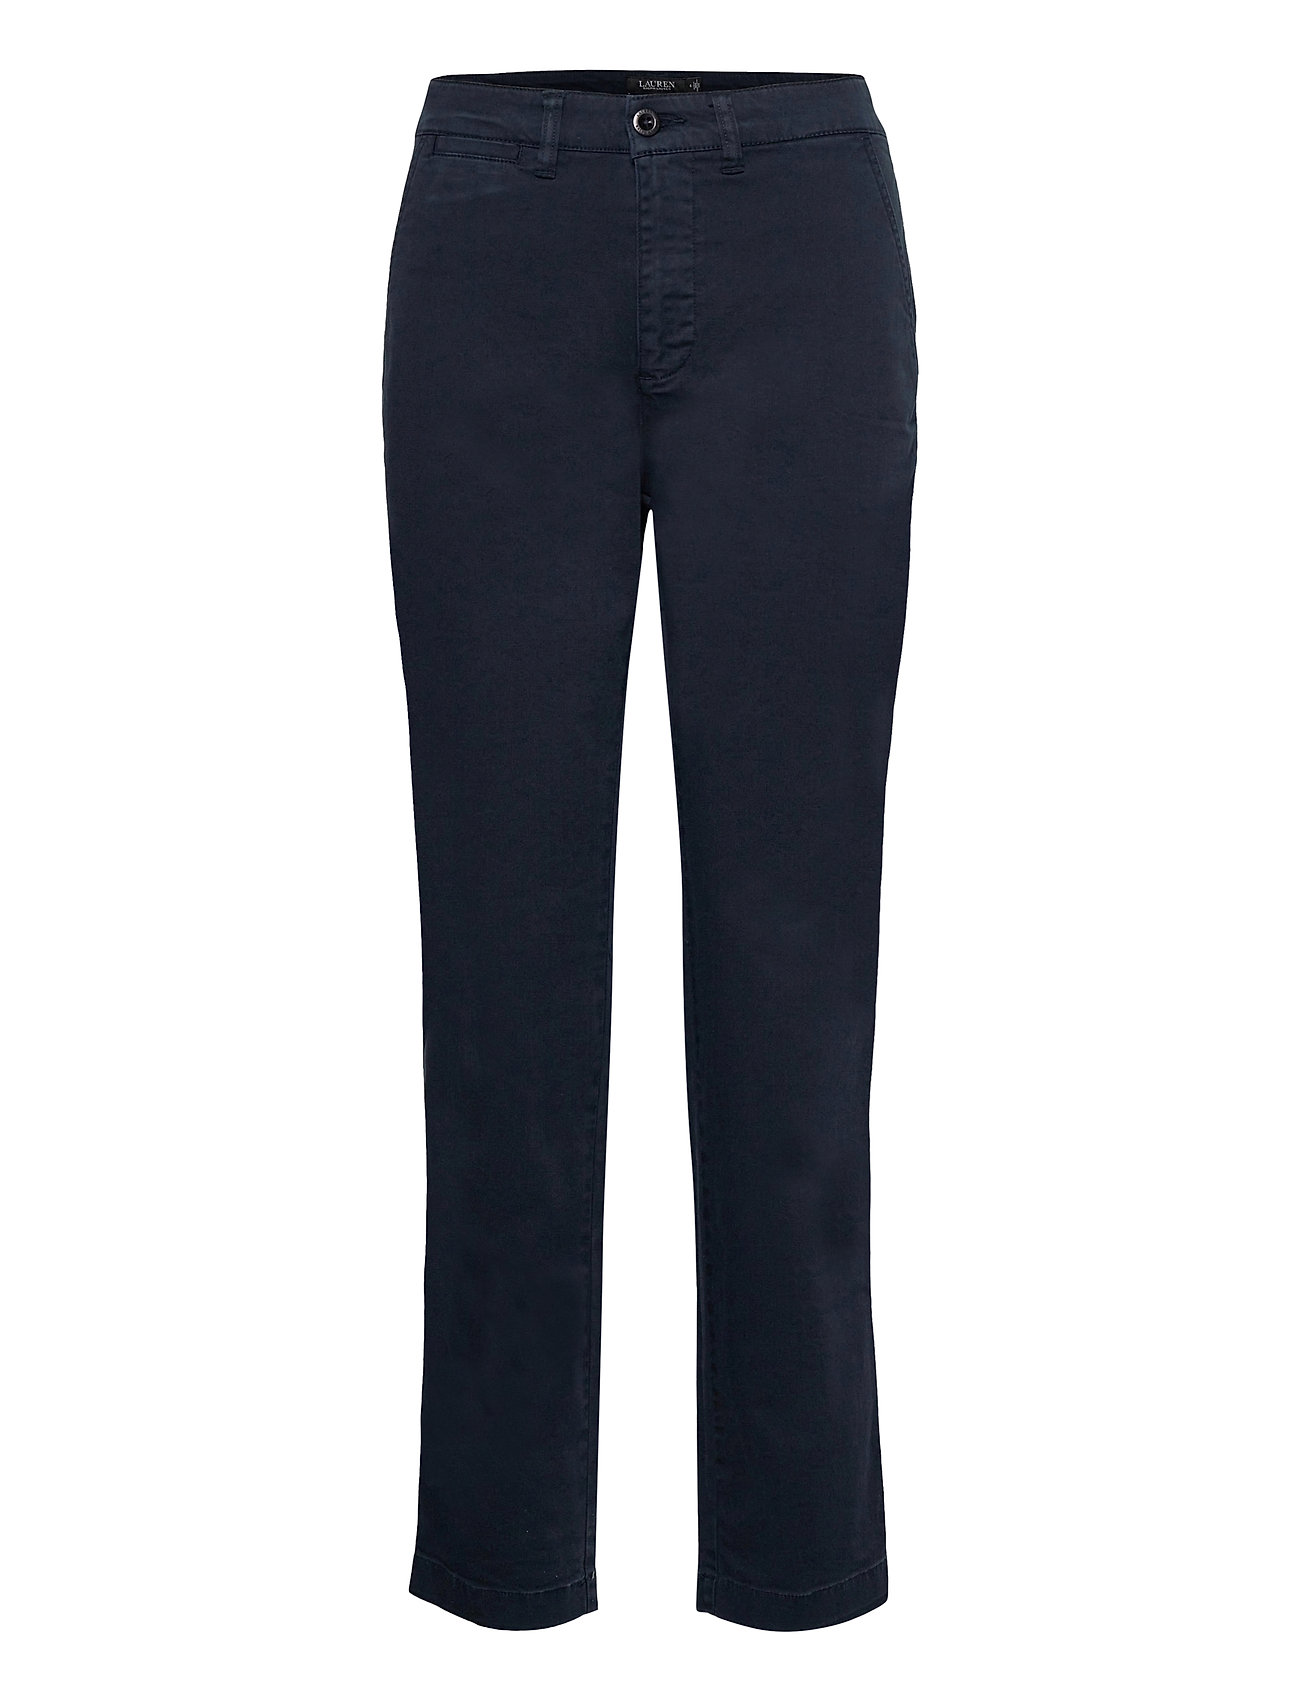 Slim Fit Stretch Chino Pant Bottoms Trousers Chinos Blue Lauren Ralph Lauren